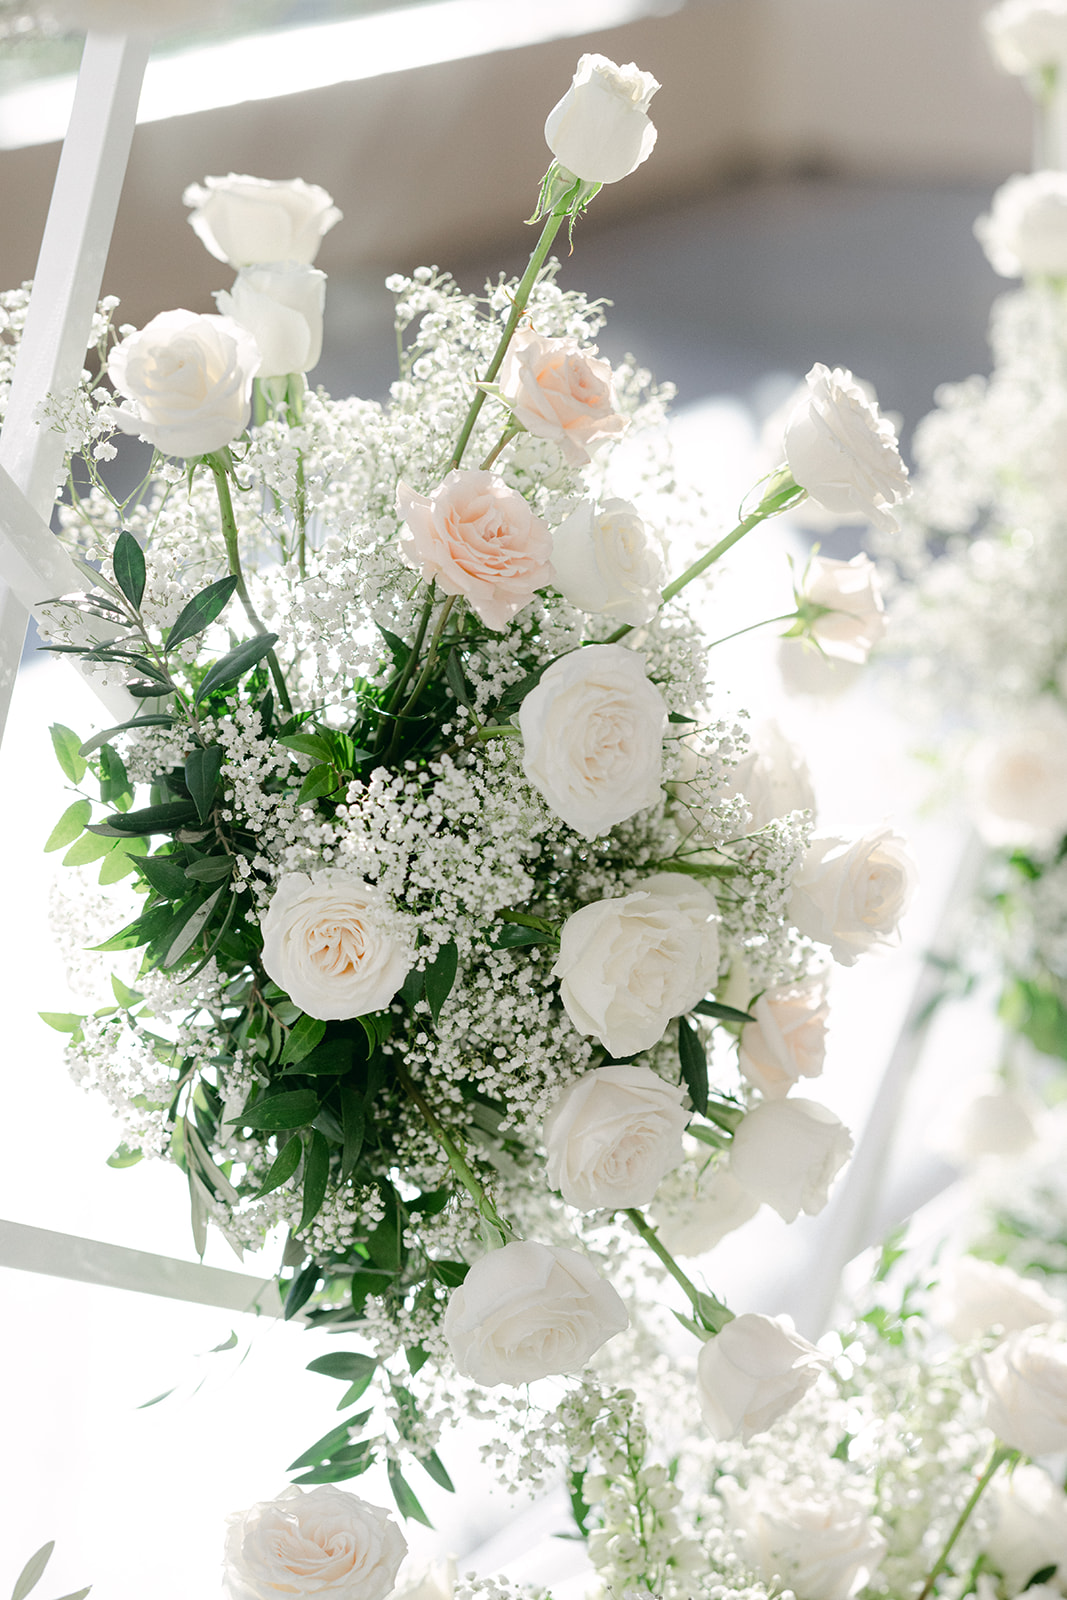 White rose and baby's breath floral 